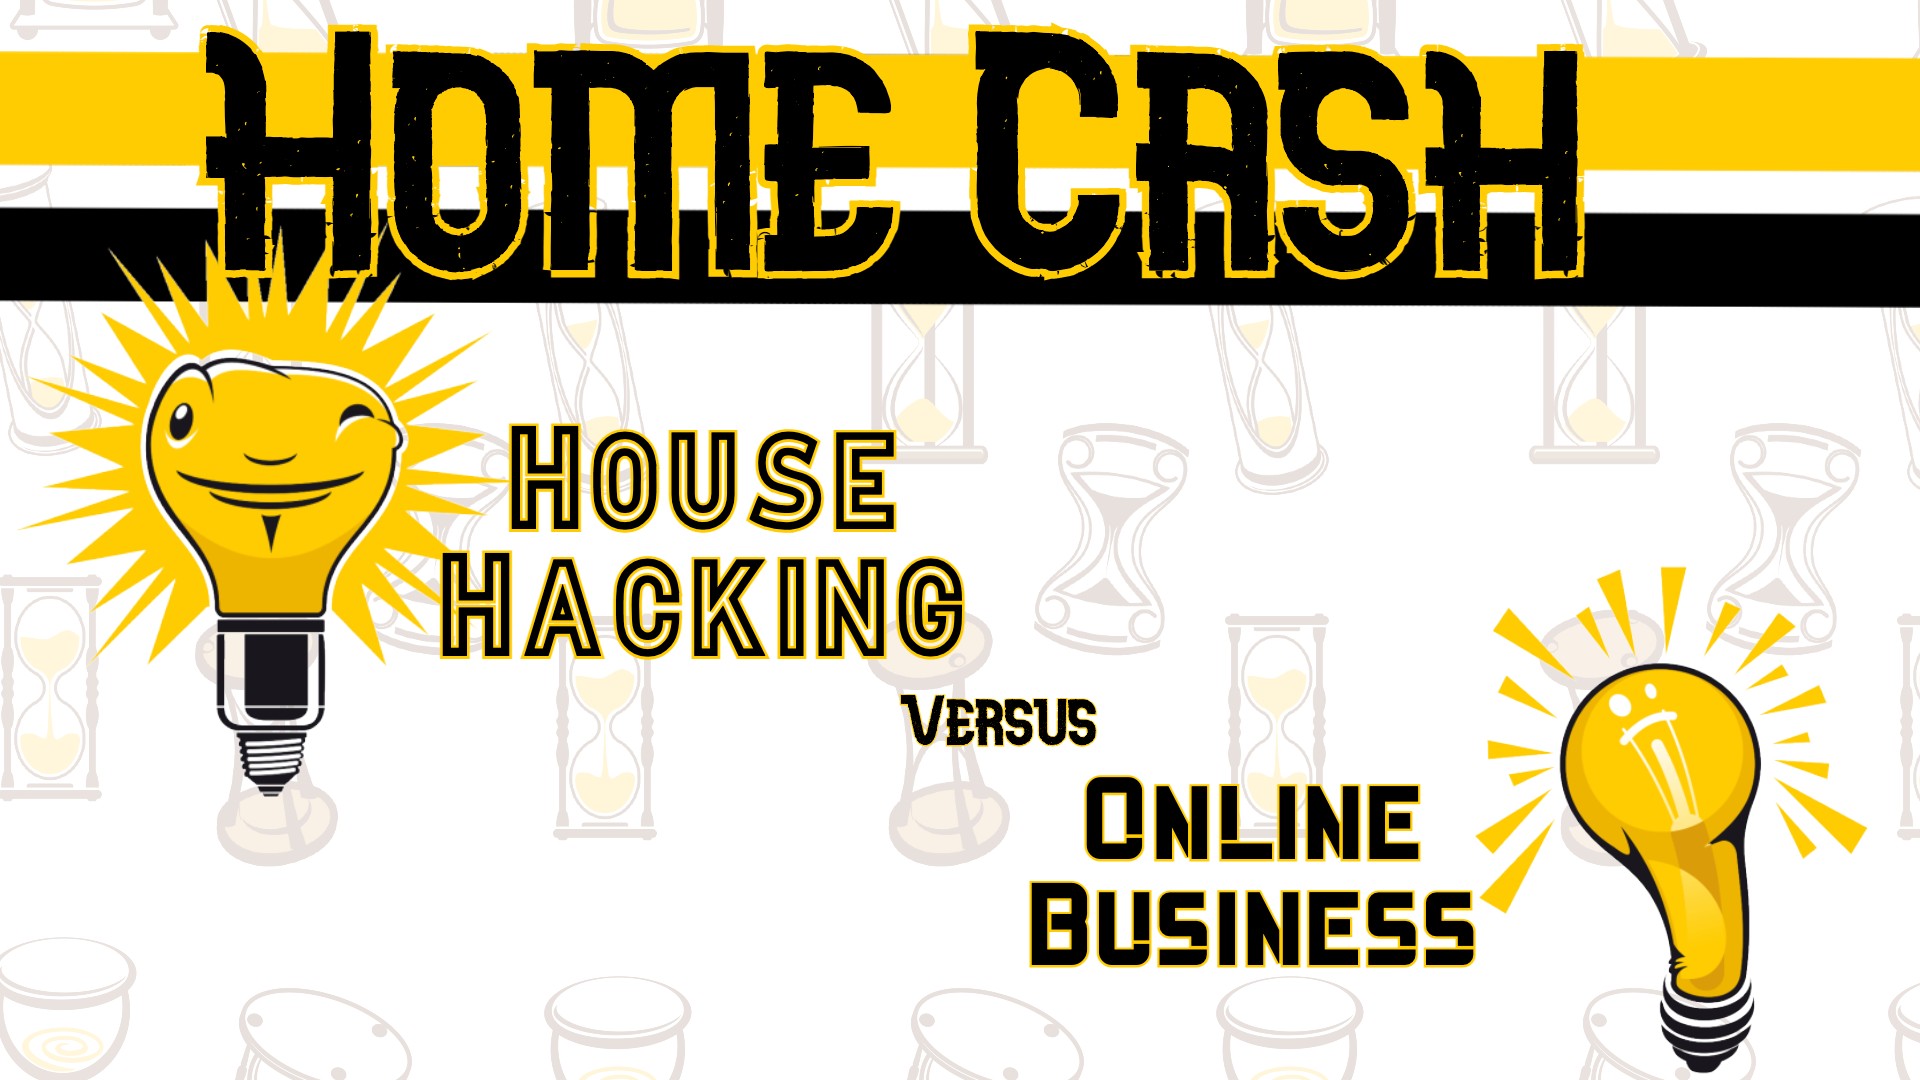 Home Cash: House Hacking vs Online Business